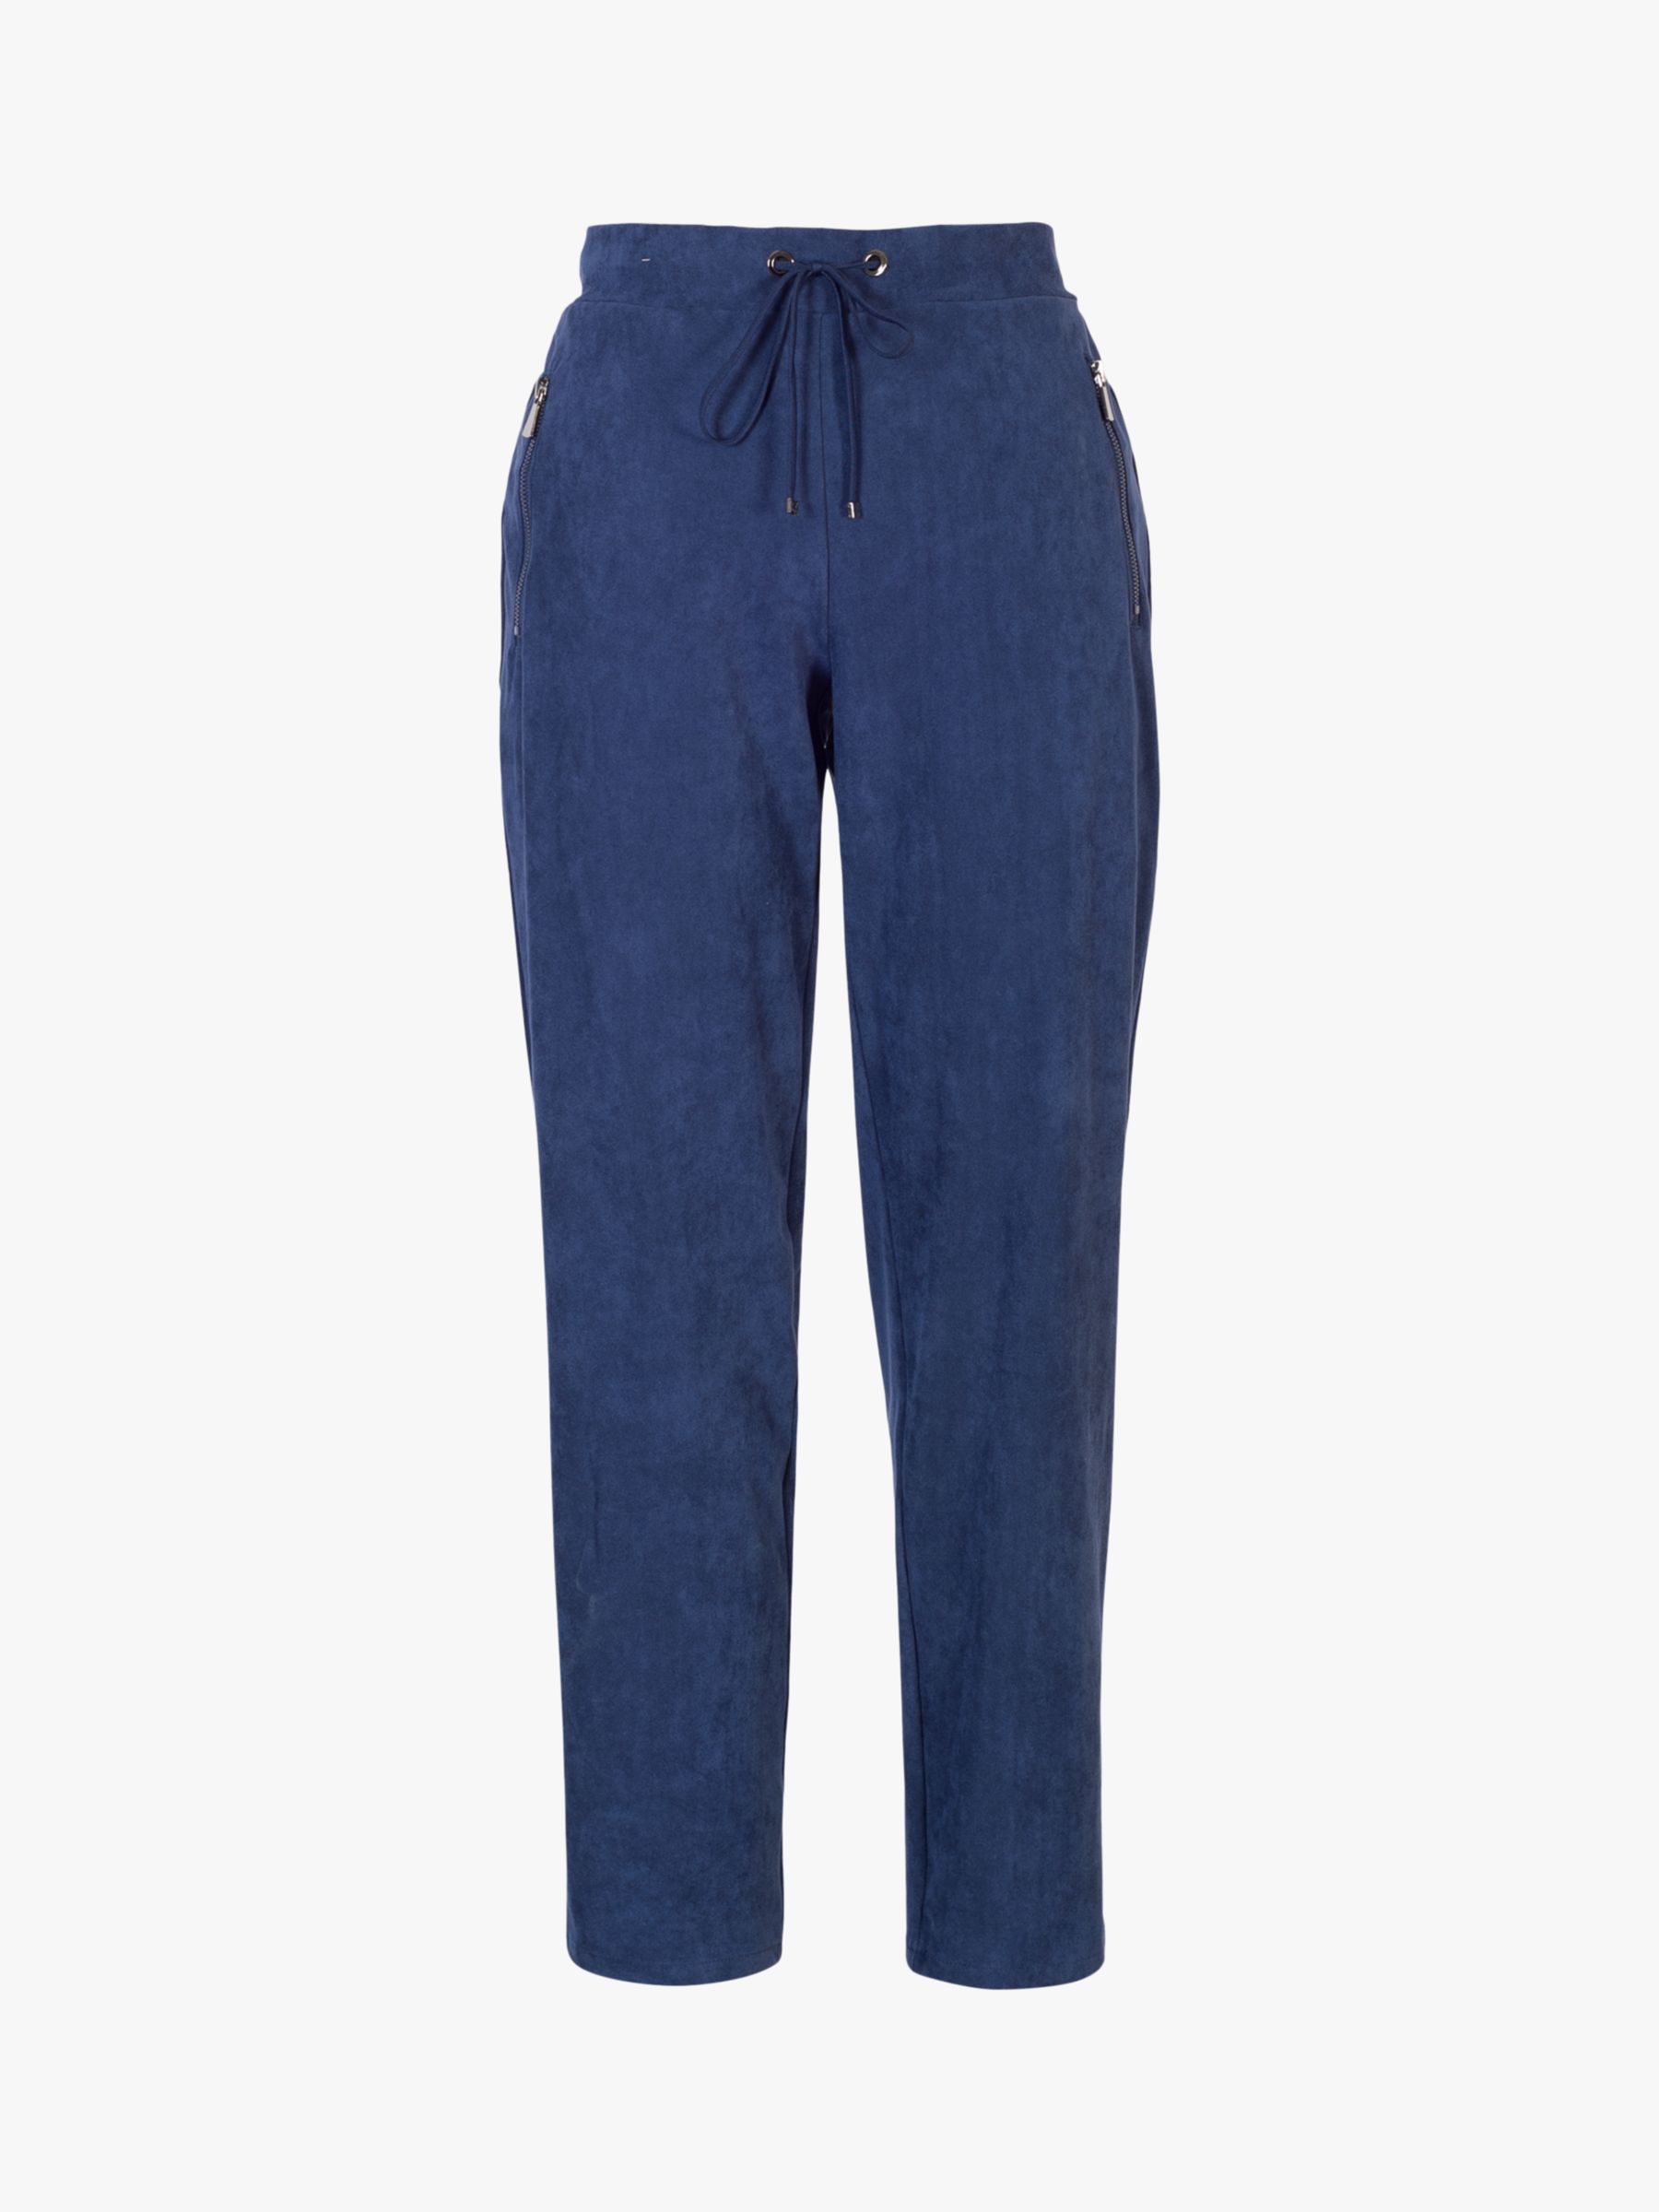 Buy chesca Faux Suede Trousers, Black Online at johnlewis.com